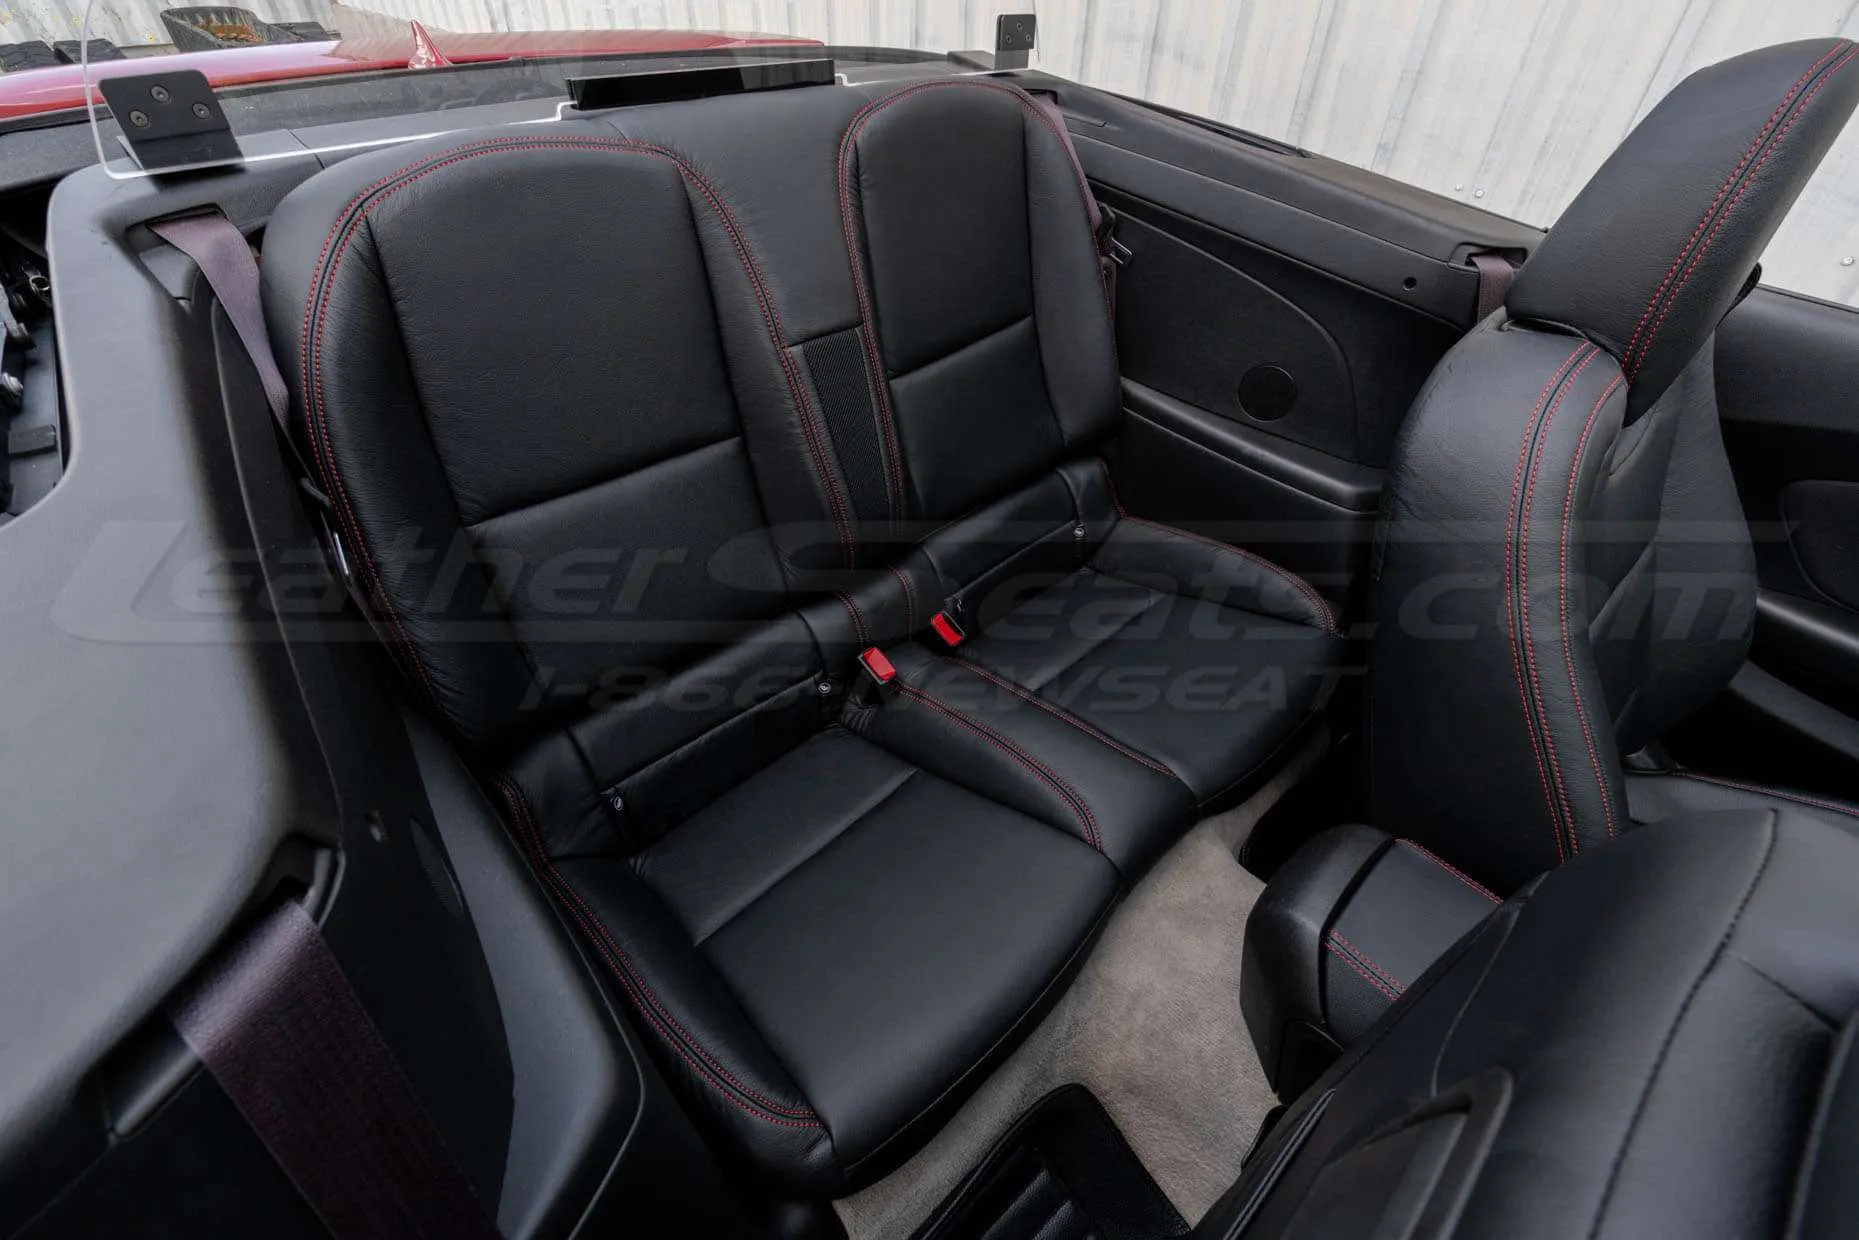 Chevrolet Camaro Black leather seats - Rear seats from passenger side